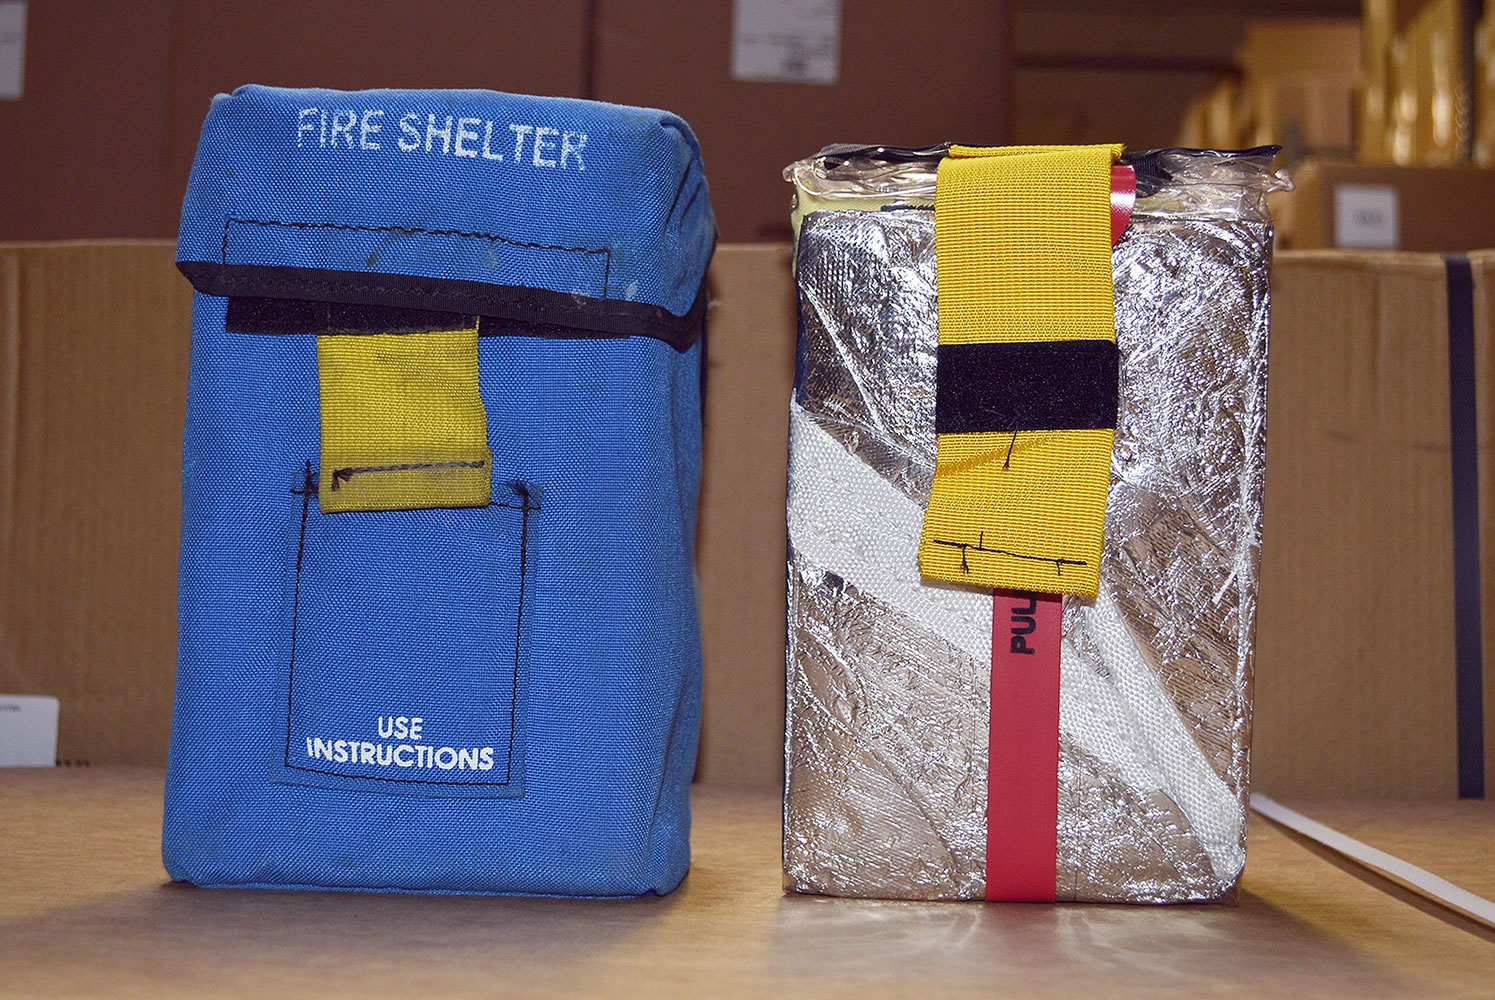 The fire shelter currently in use, right, and its protective pouch, at the NIFC in Boise, Idaho. The U.S.